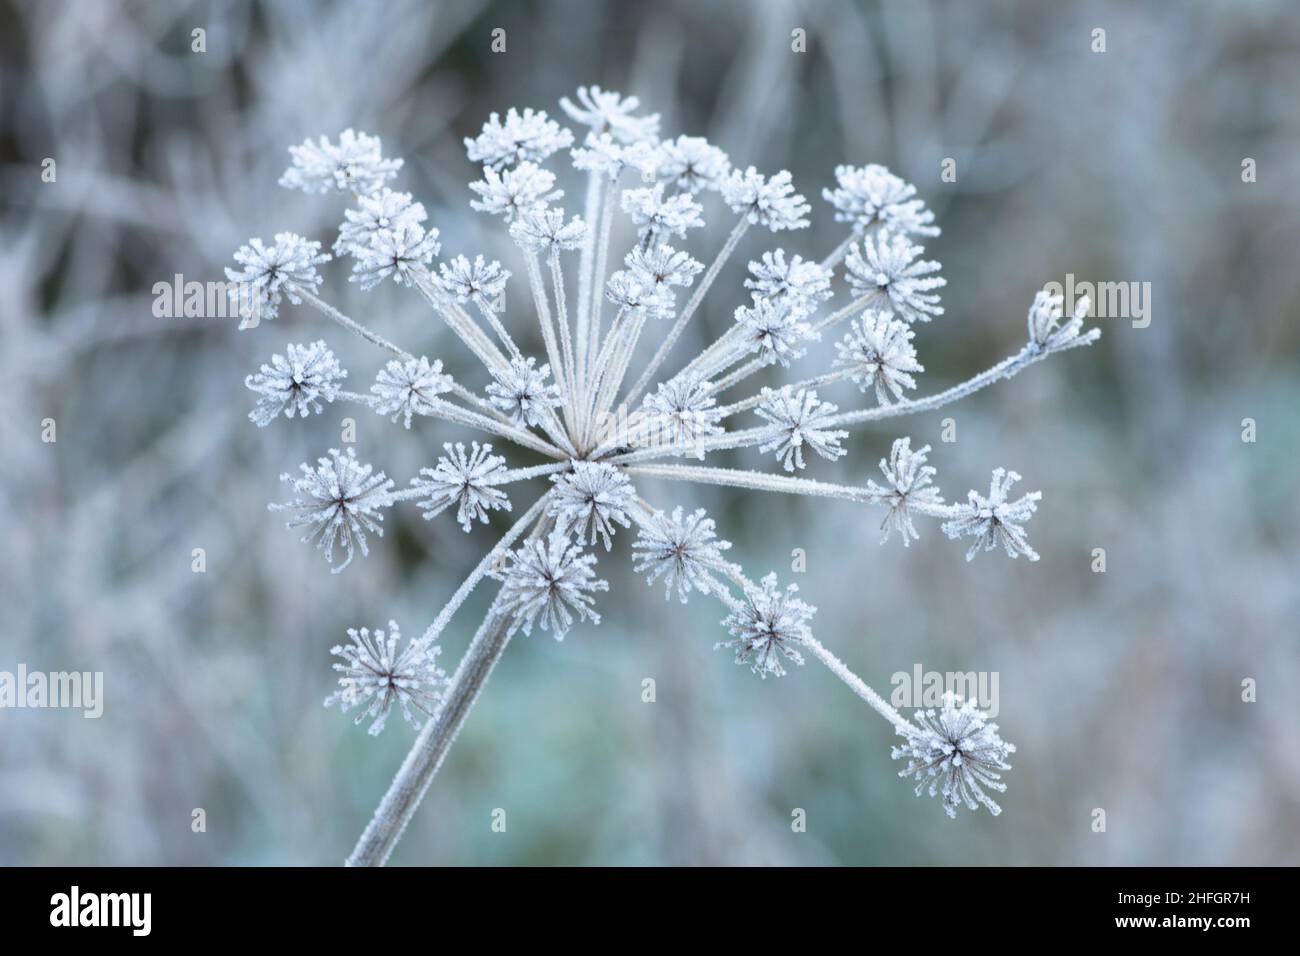 Common Hogweed, Heracleum sphondylium, Cow parsnip, flower head covered with frost in winter January, Sussex, UK Stock Photo